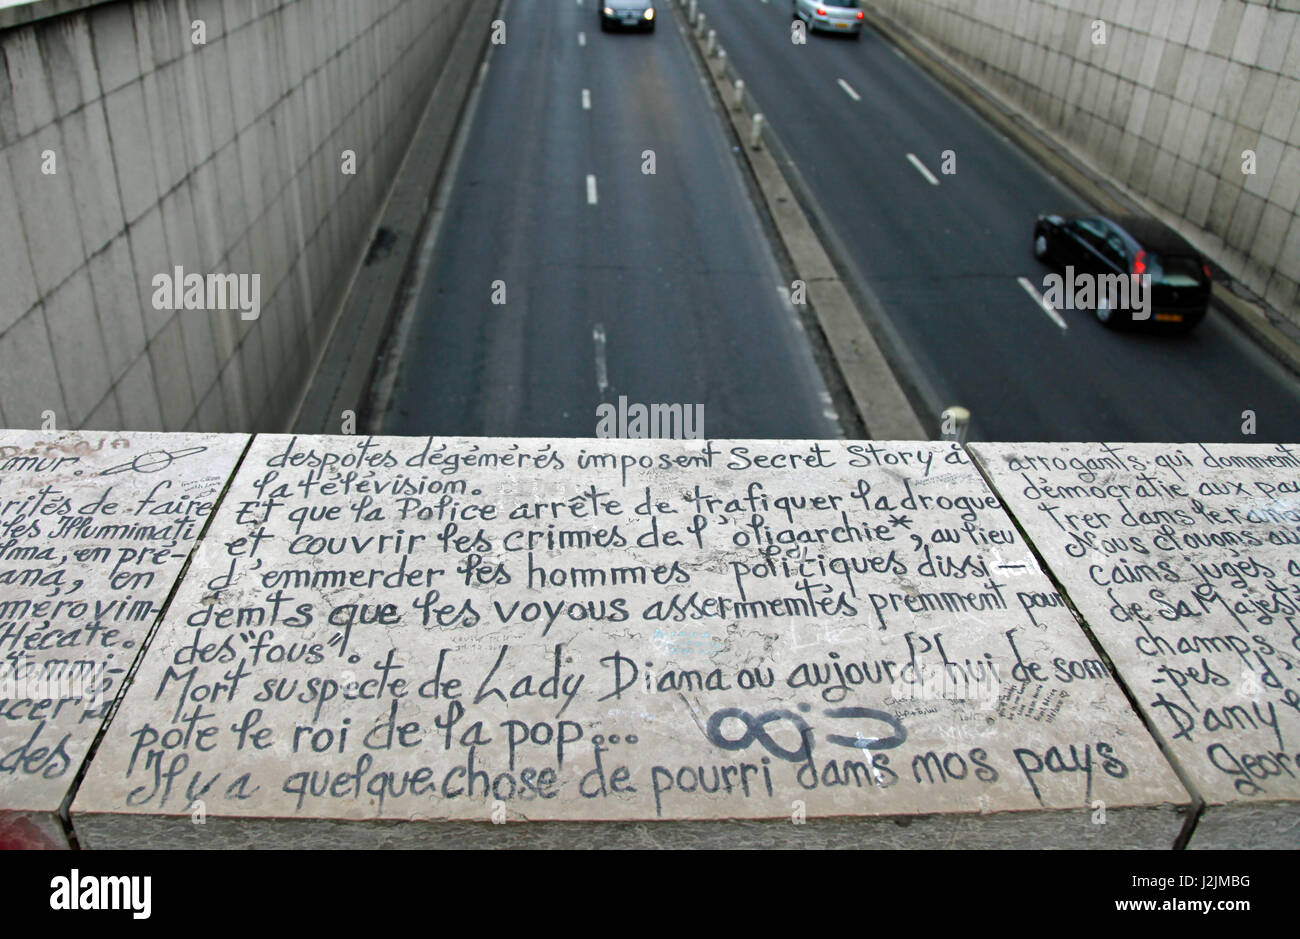 Writing, in French, on the bridge over the underpass where Princess Diana, together with Dodi Fayed, died on 31 August 1997 Stock Photo